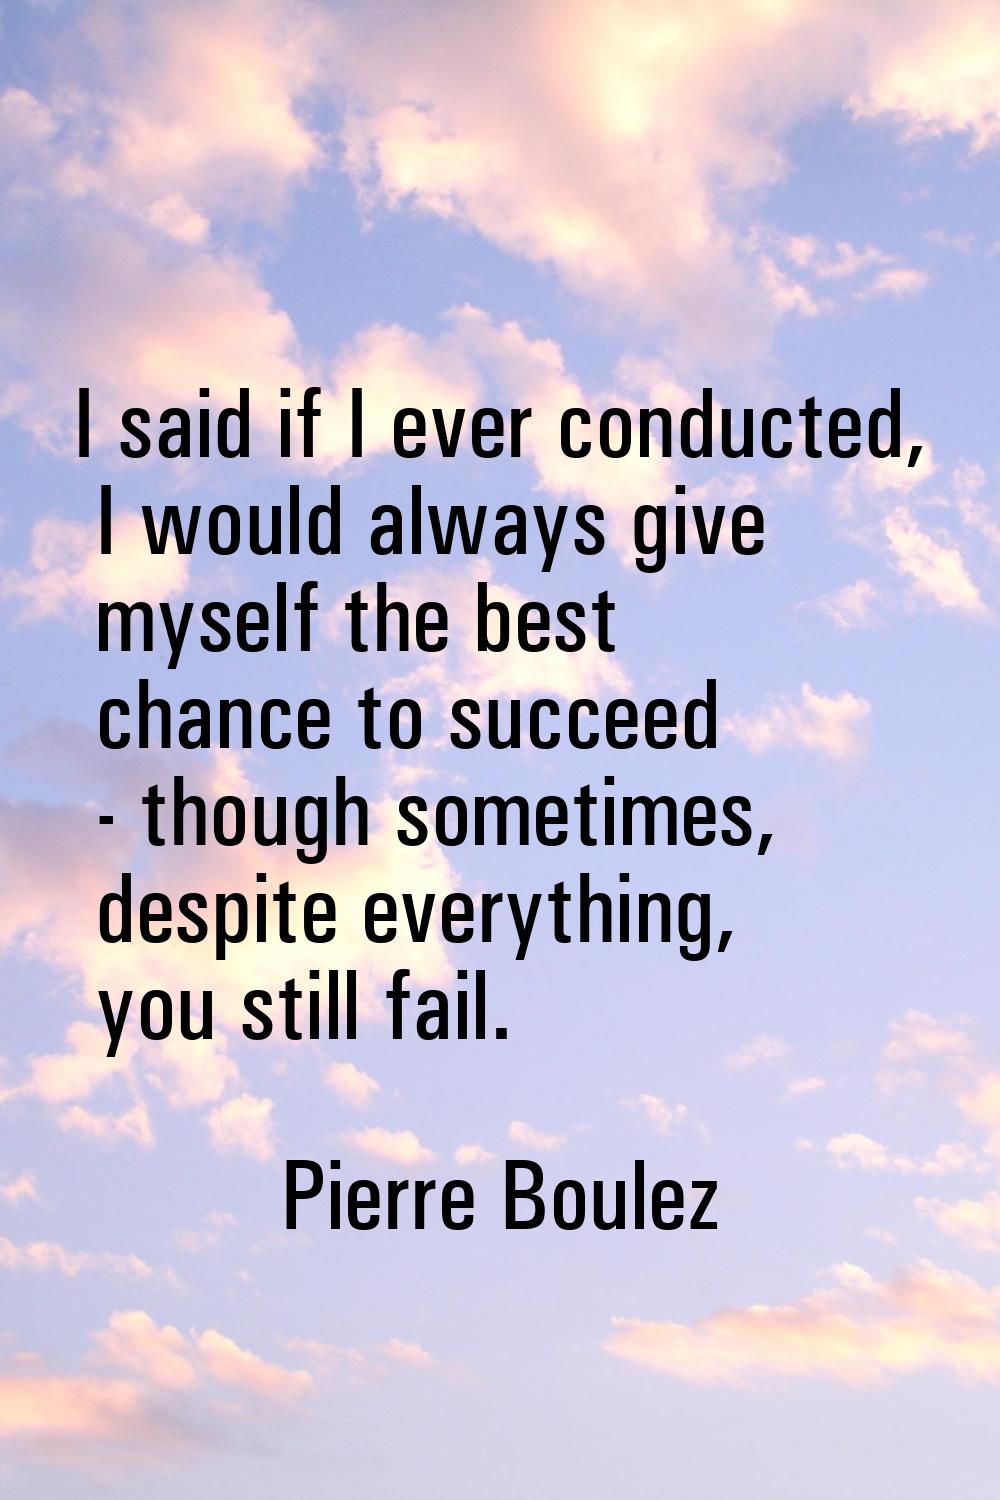 I said if I ever conducted, I would always give myself the best chance to succeed - though sometime